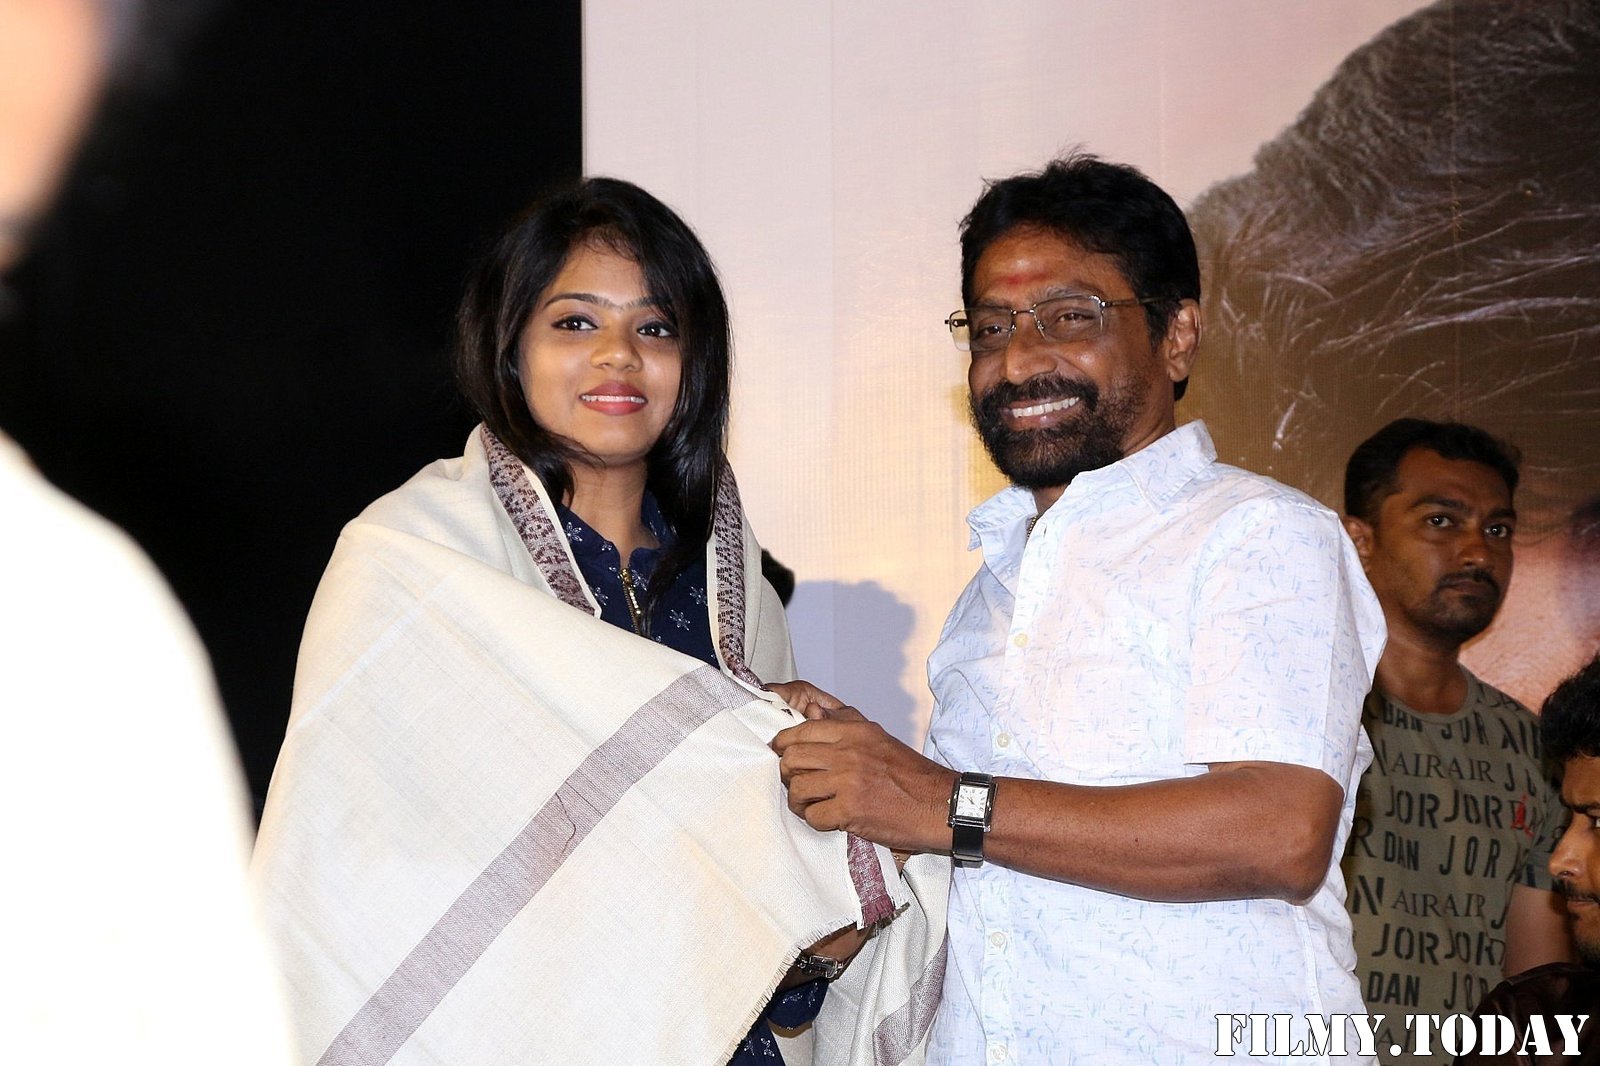 Thedu Movie Audio And Trailer Launch Photos | Picture 1692065